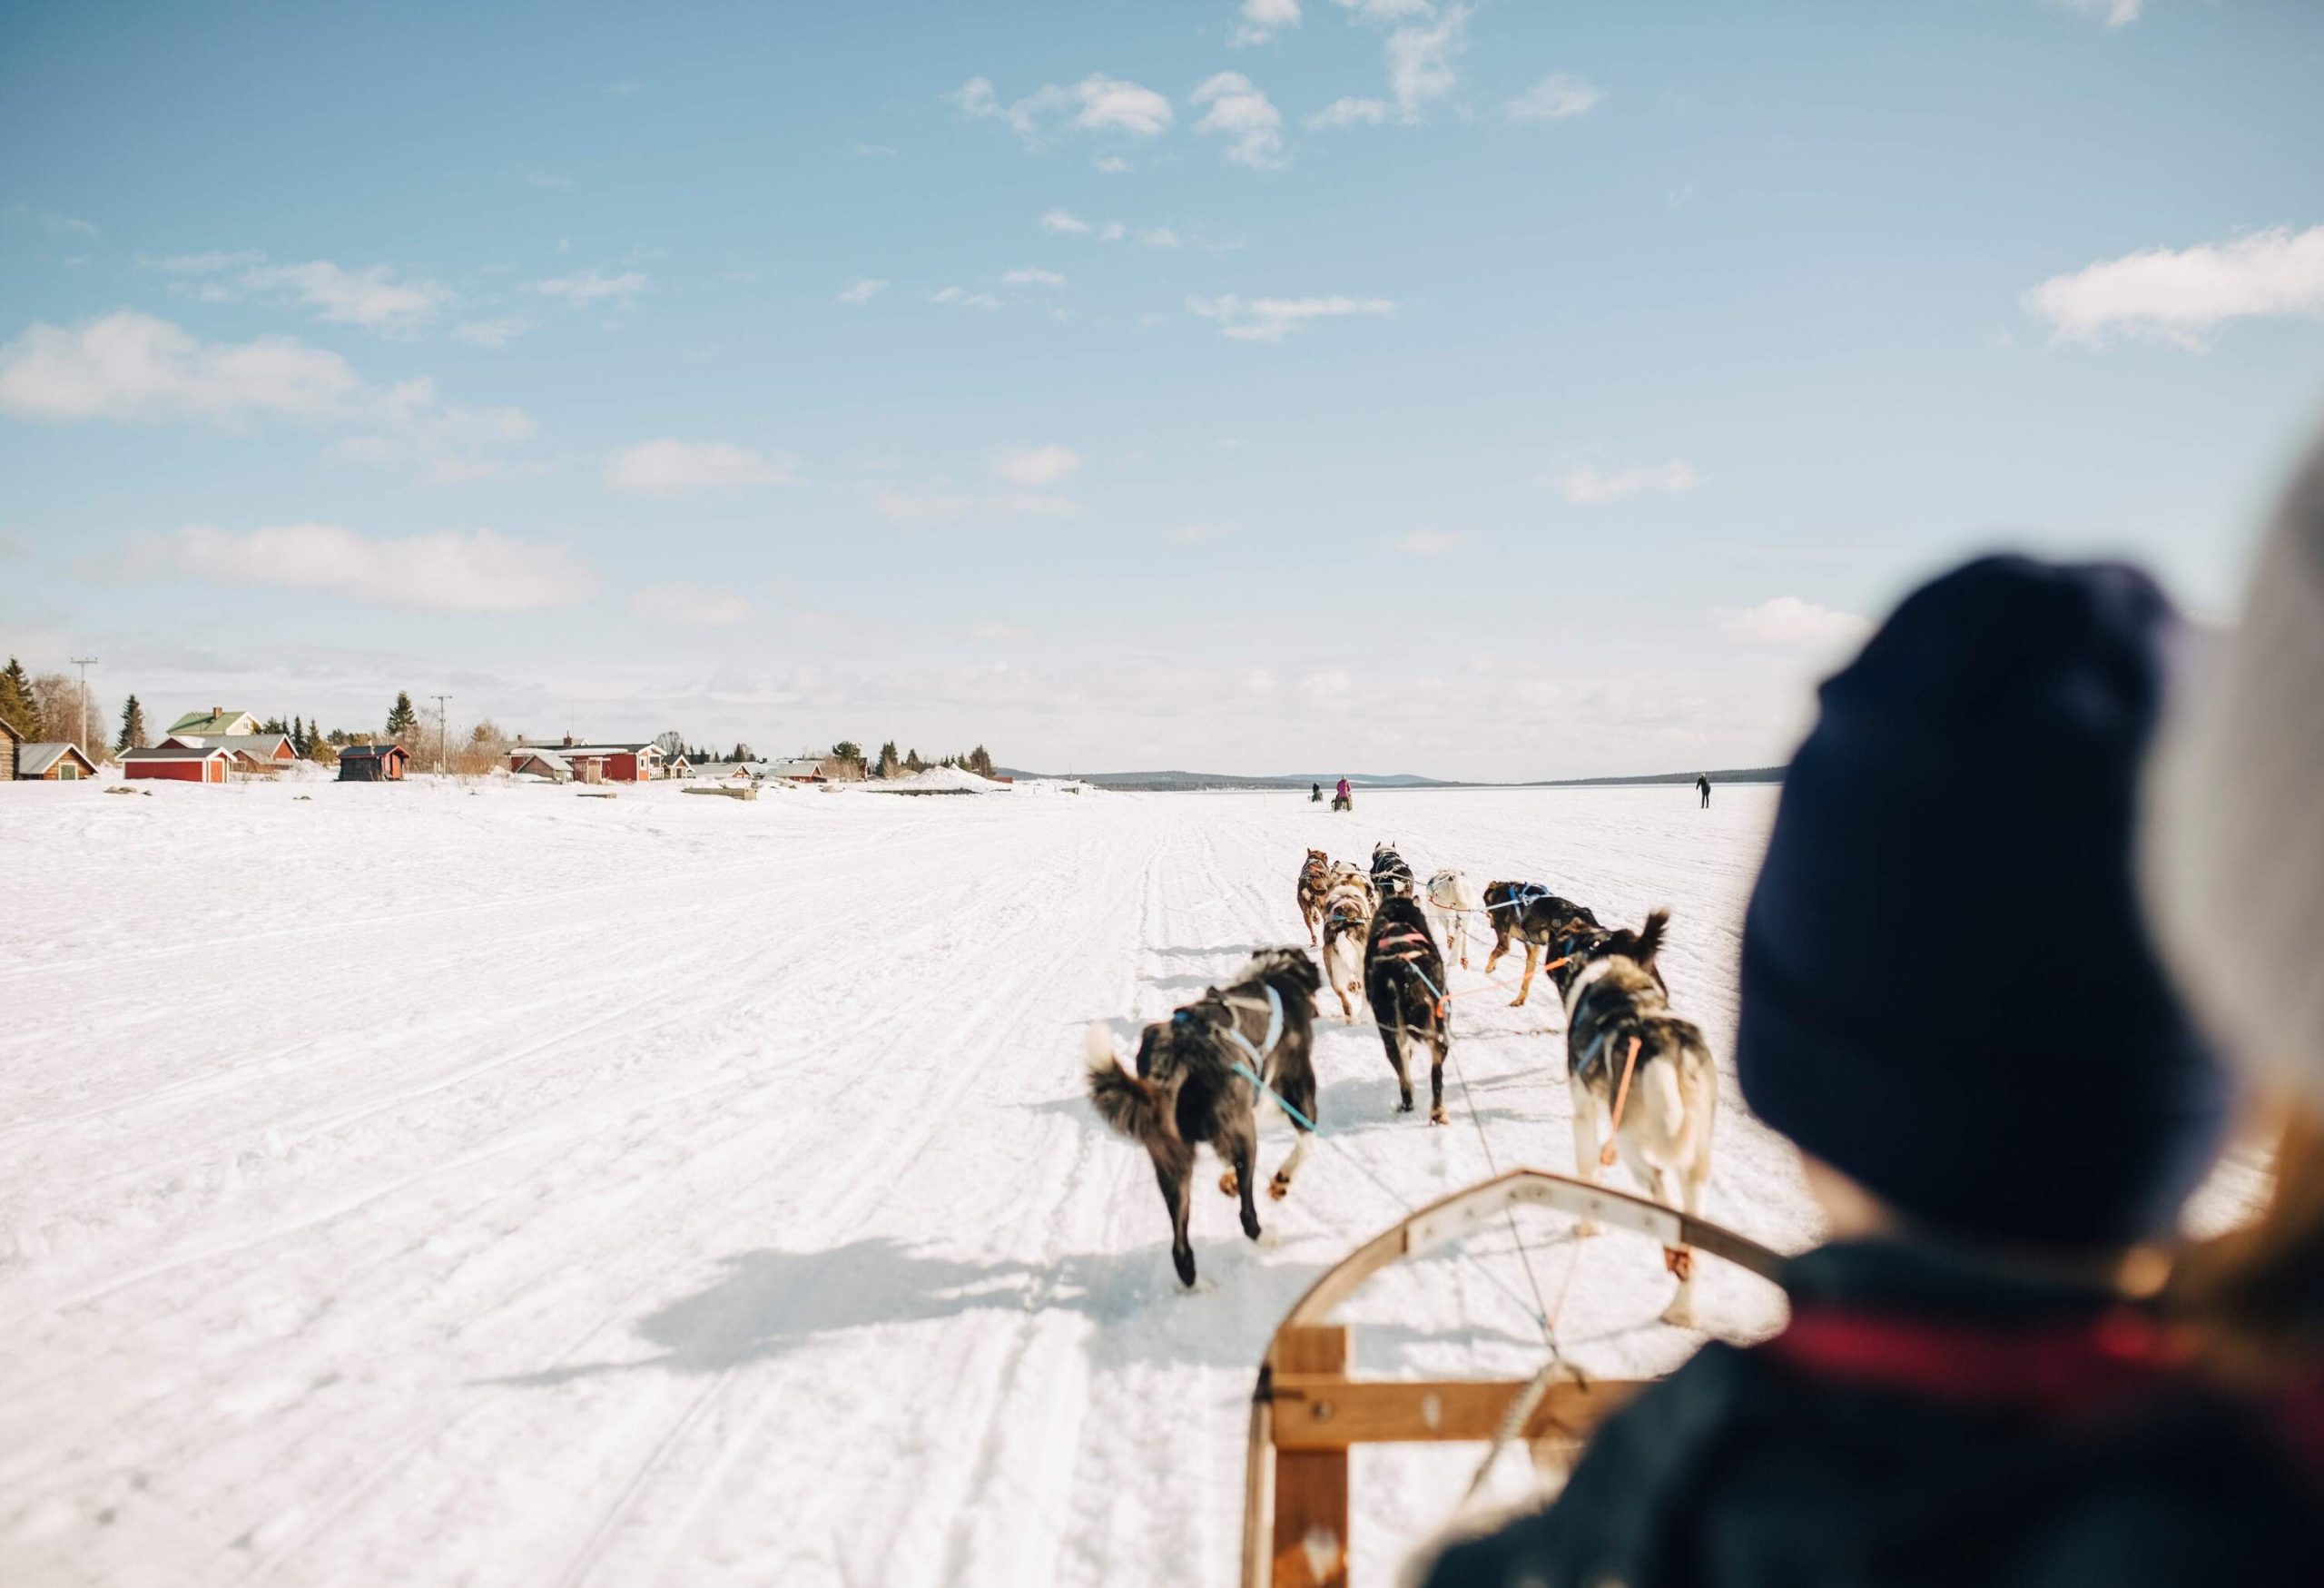 A team of dogs is dragging a sledge on snowy ground close to a settlement.